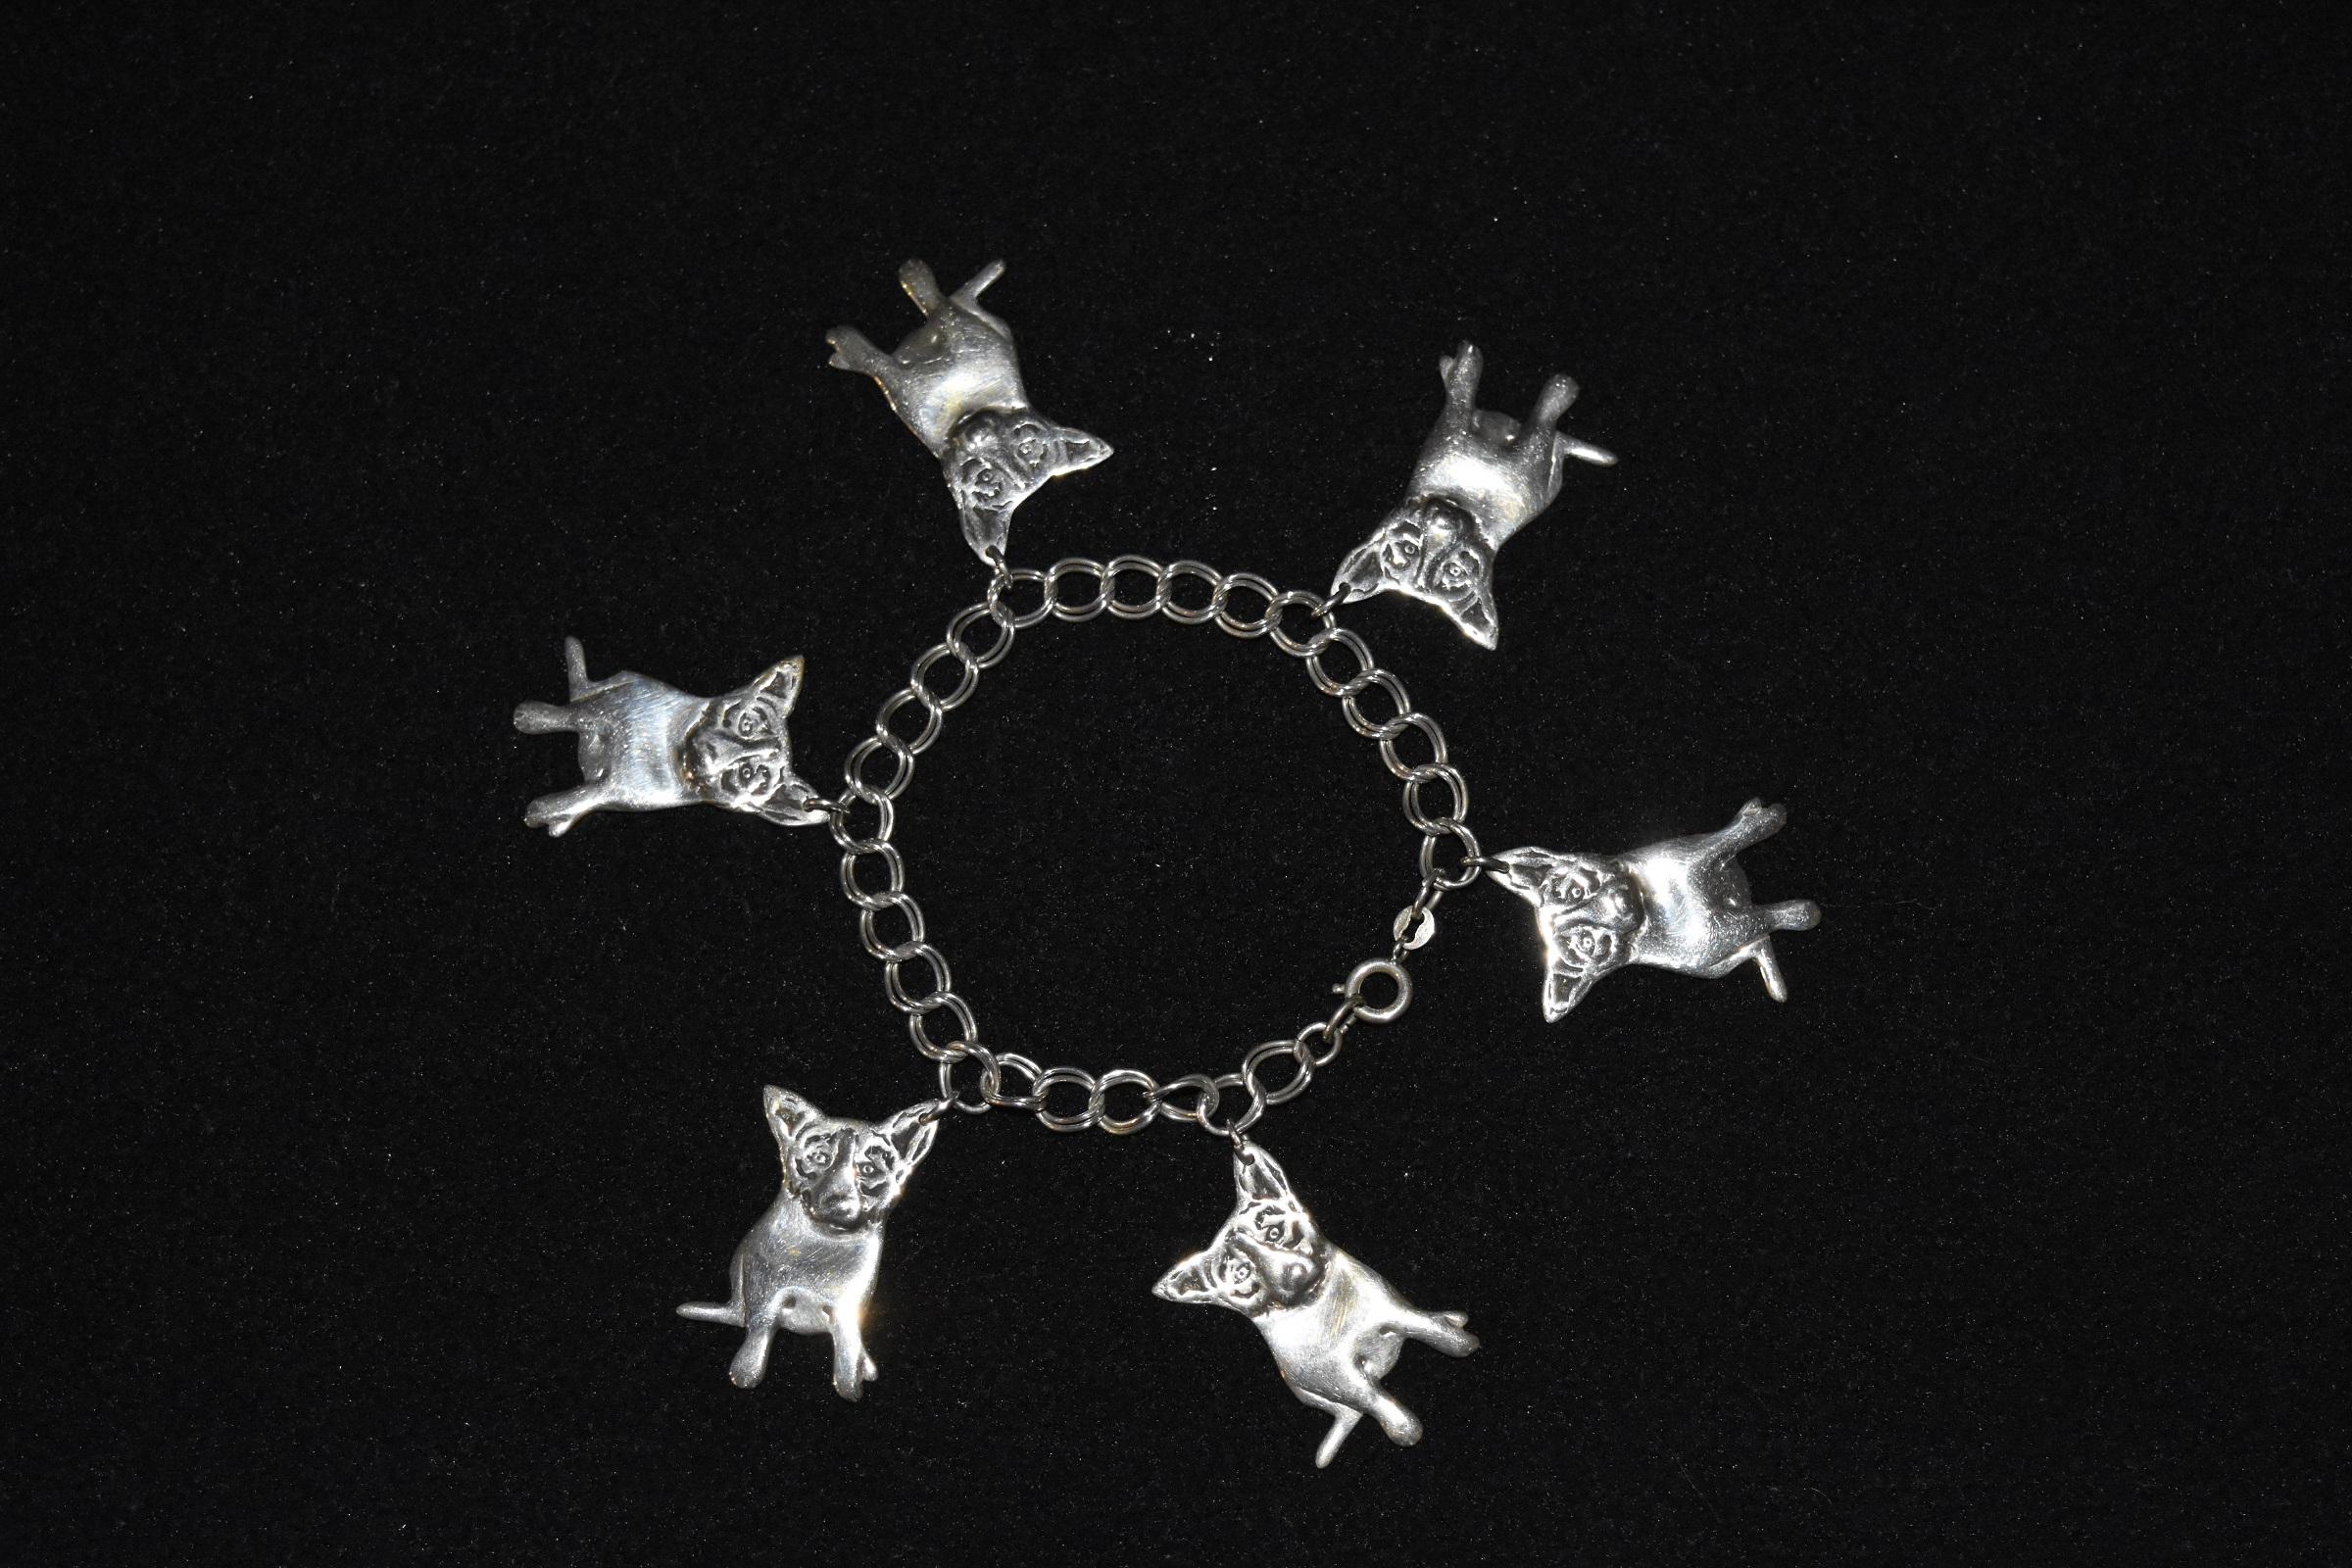 Blue Dog Sterling Silver Charm Bracelet with 6 Charms - Art by George Rodrigue